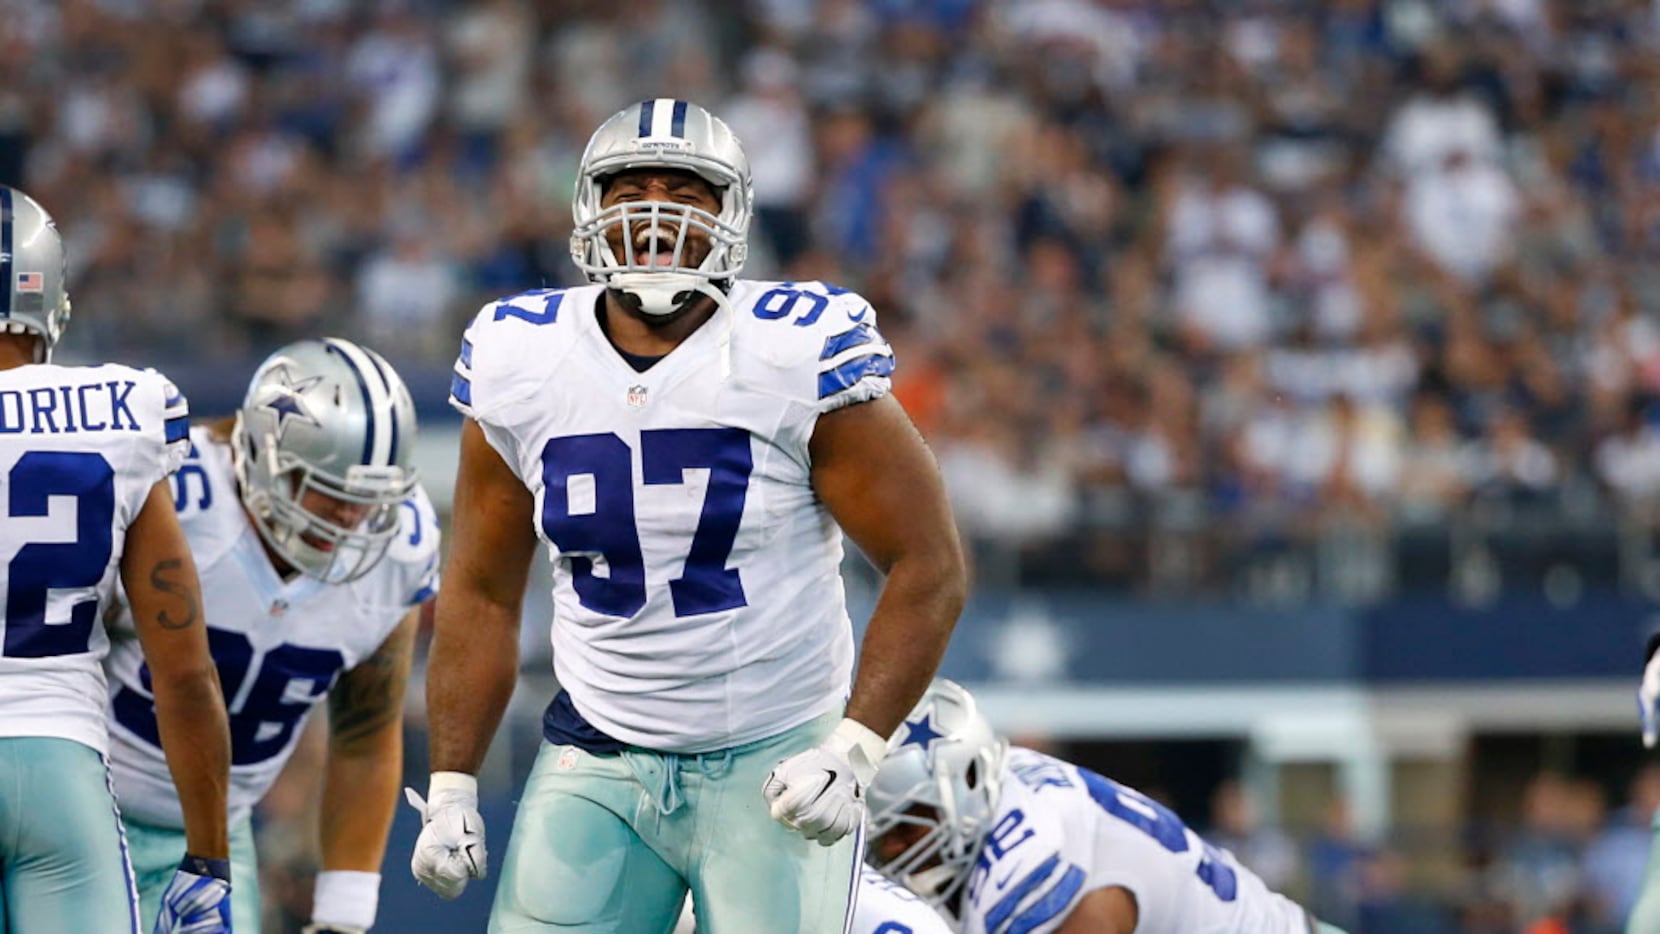 Sturm: Why playing with a lead gives Cowboys defense new life